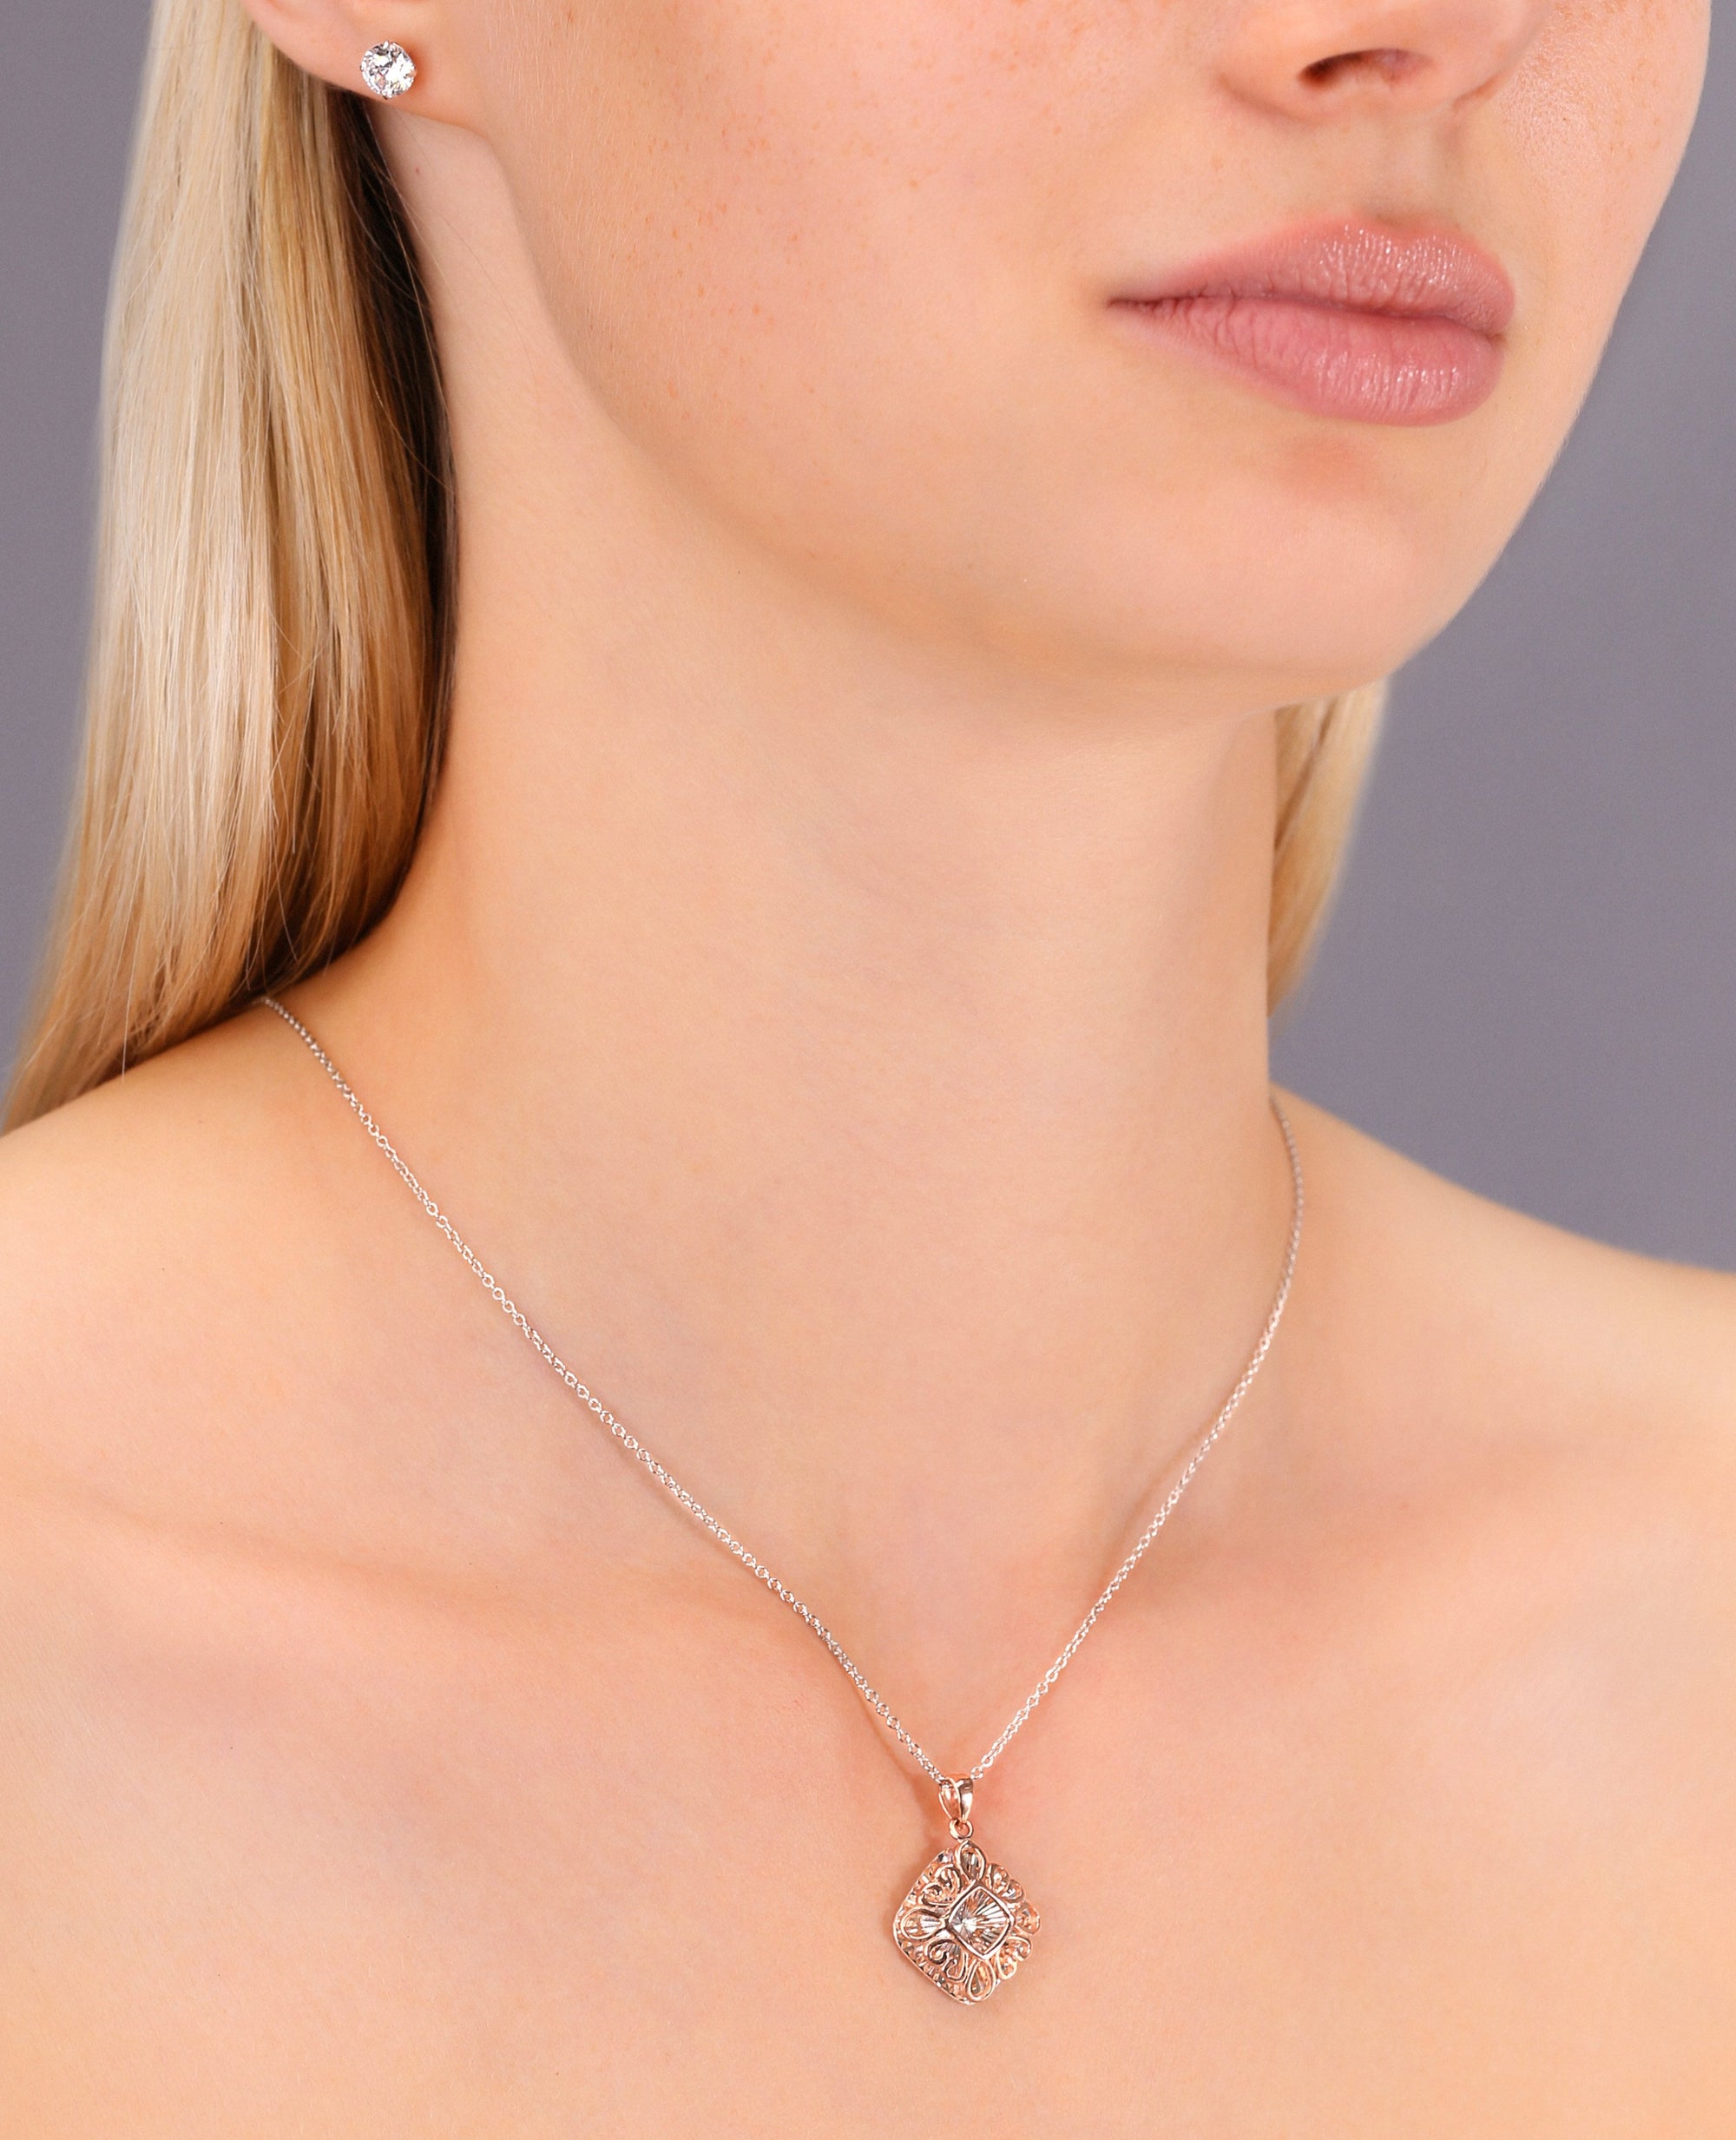 Diamond Charm Necklace, Rose Gold Plated in Sterling Silver